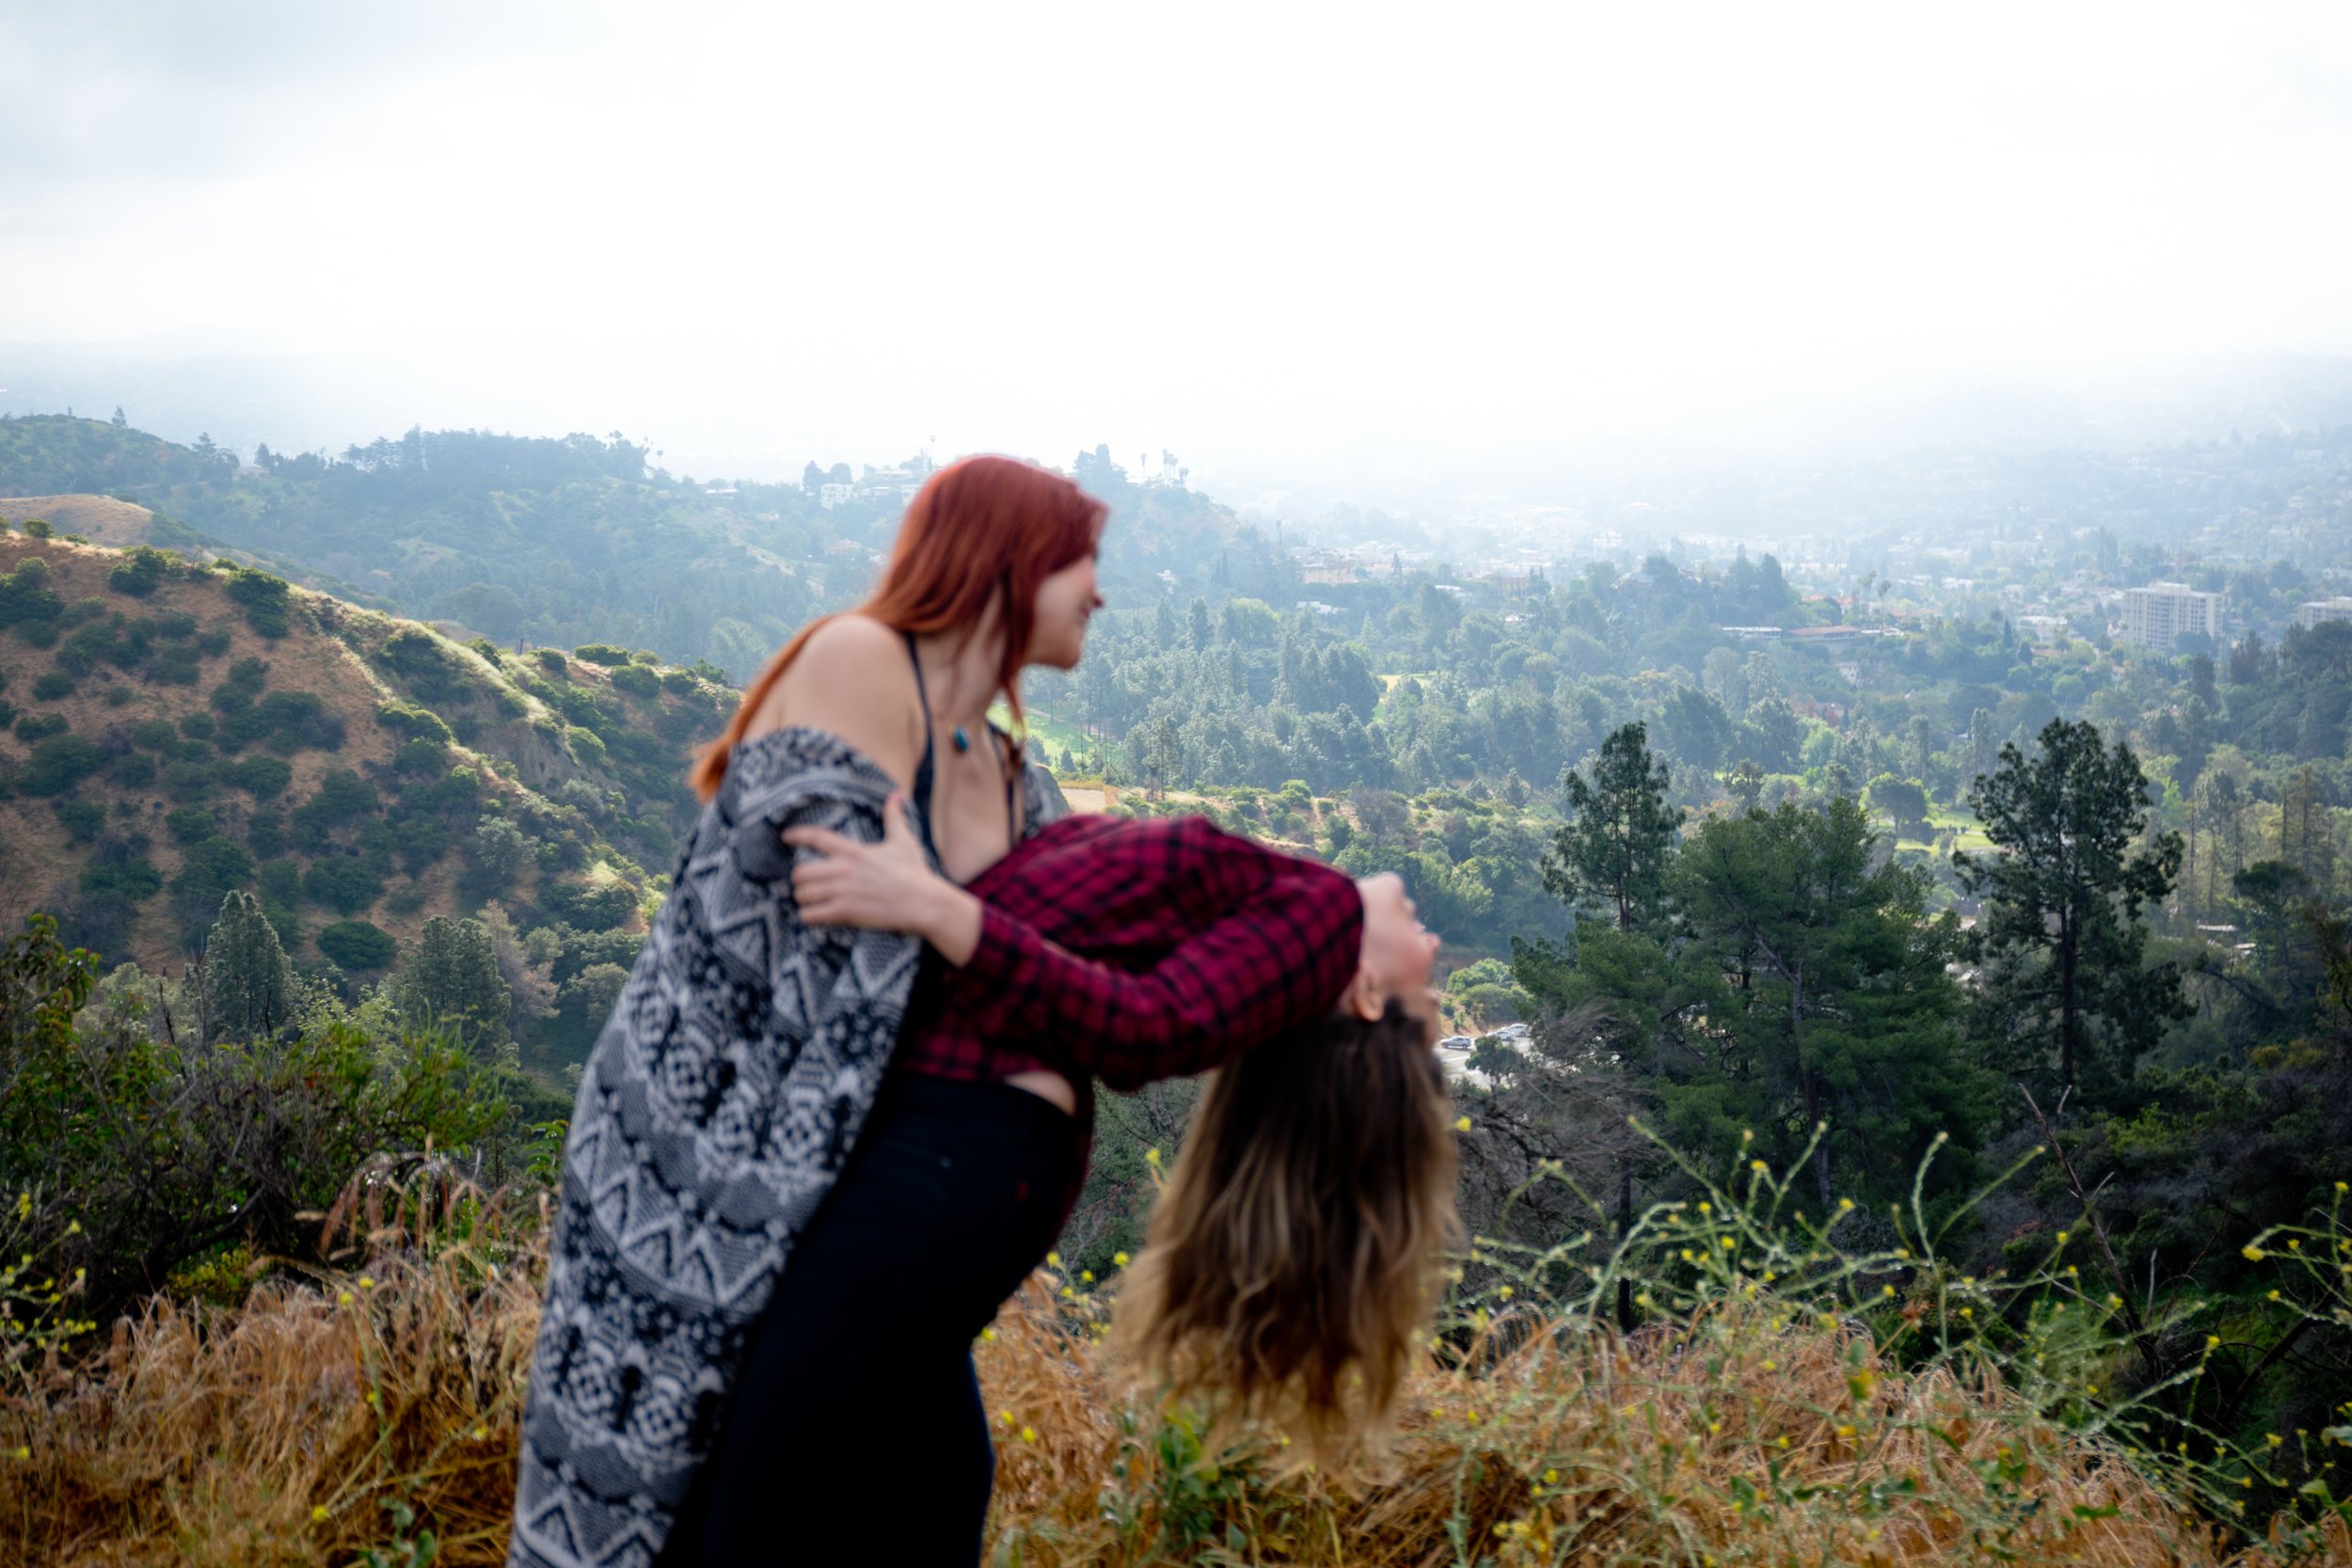 Courtney &amp; Tierney dancing with the hills of Los Angeles in the background